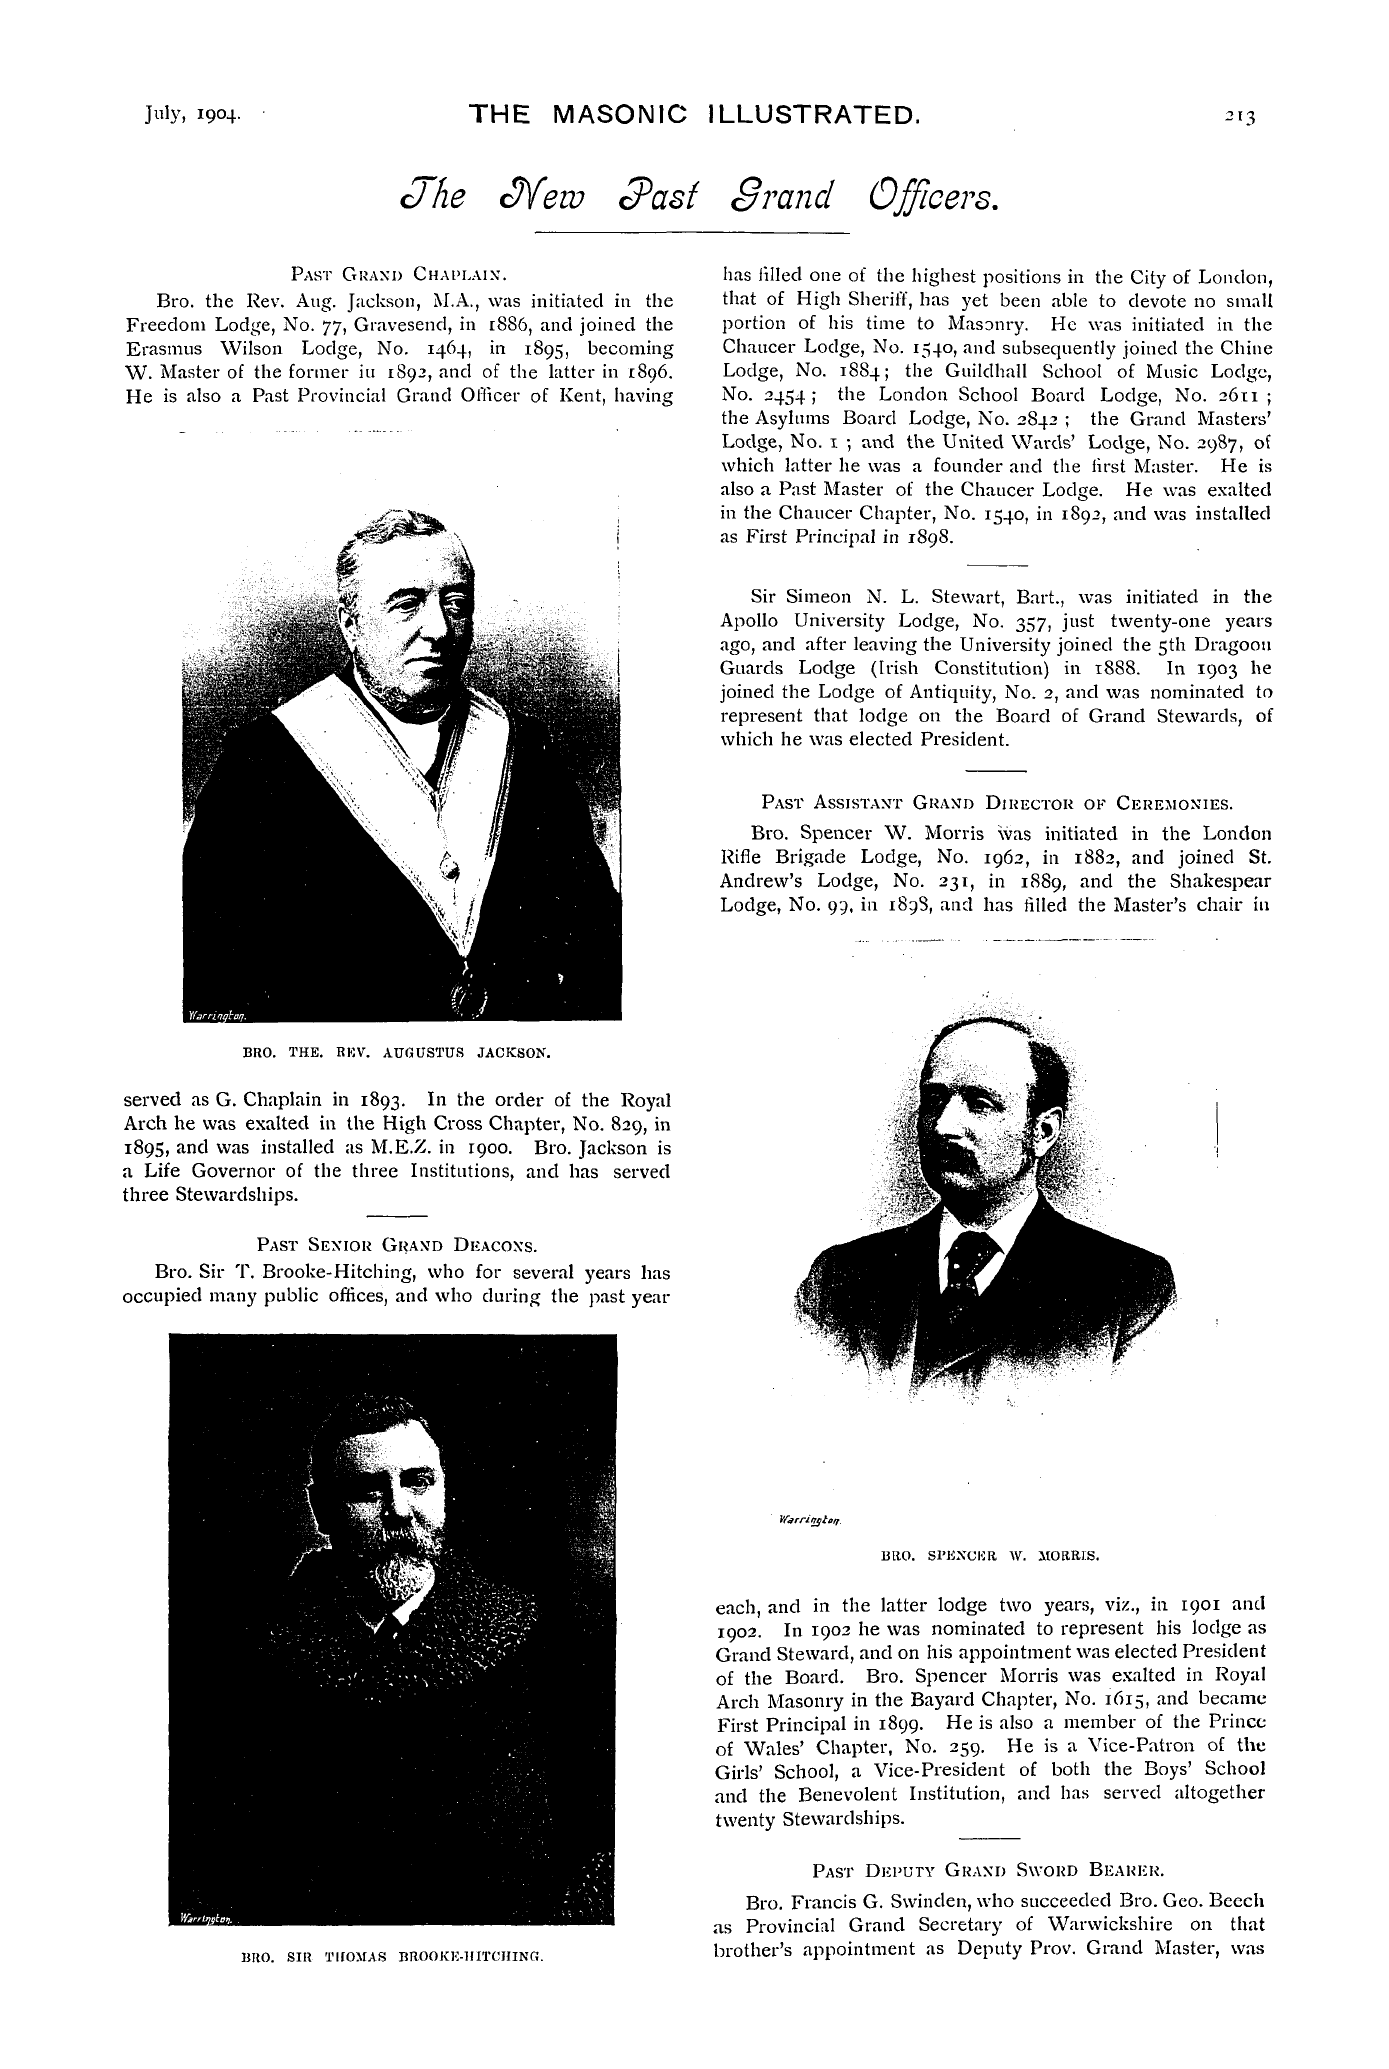 The Masonic Illustrated: 1904-07-01 - The New Past Grand Officers.